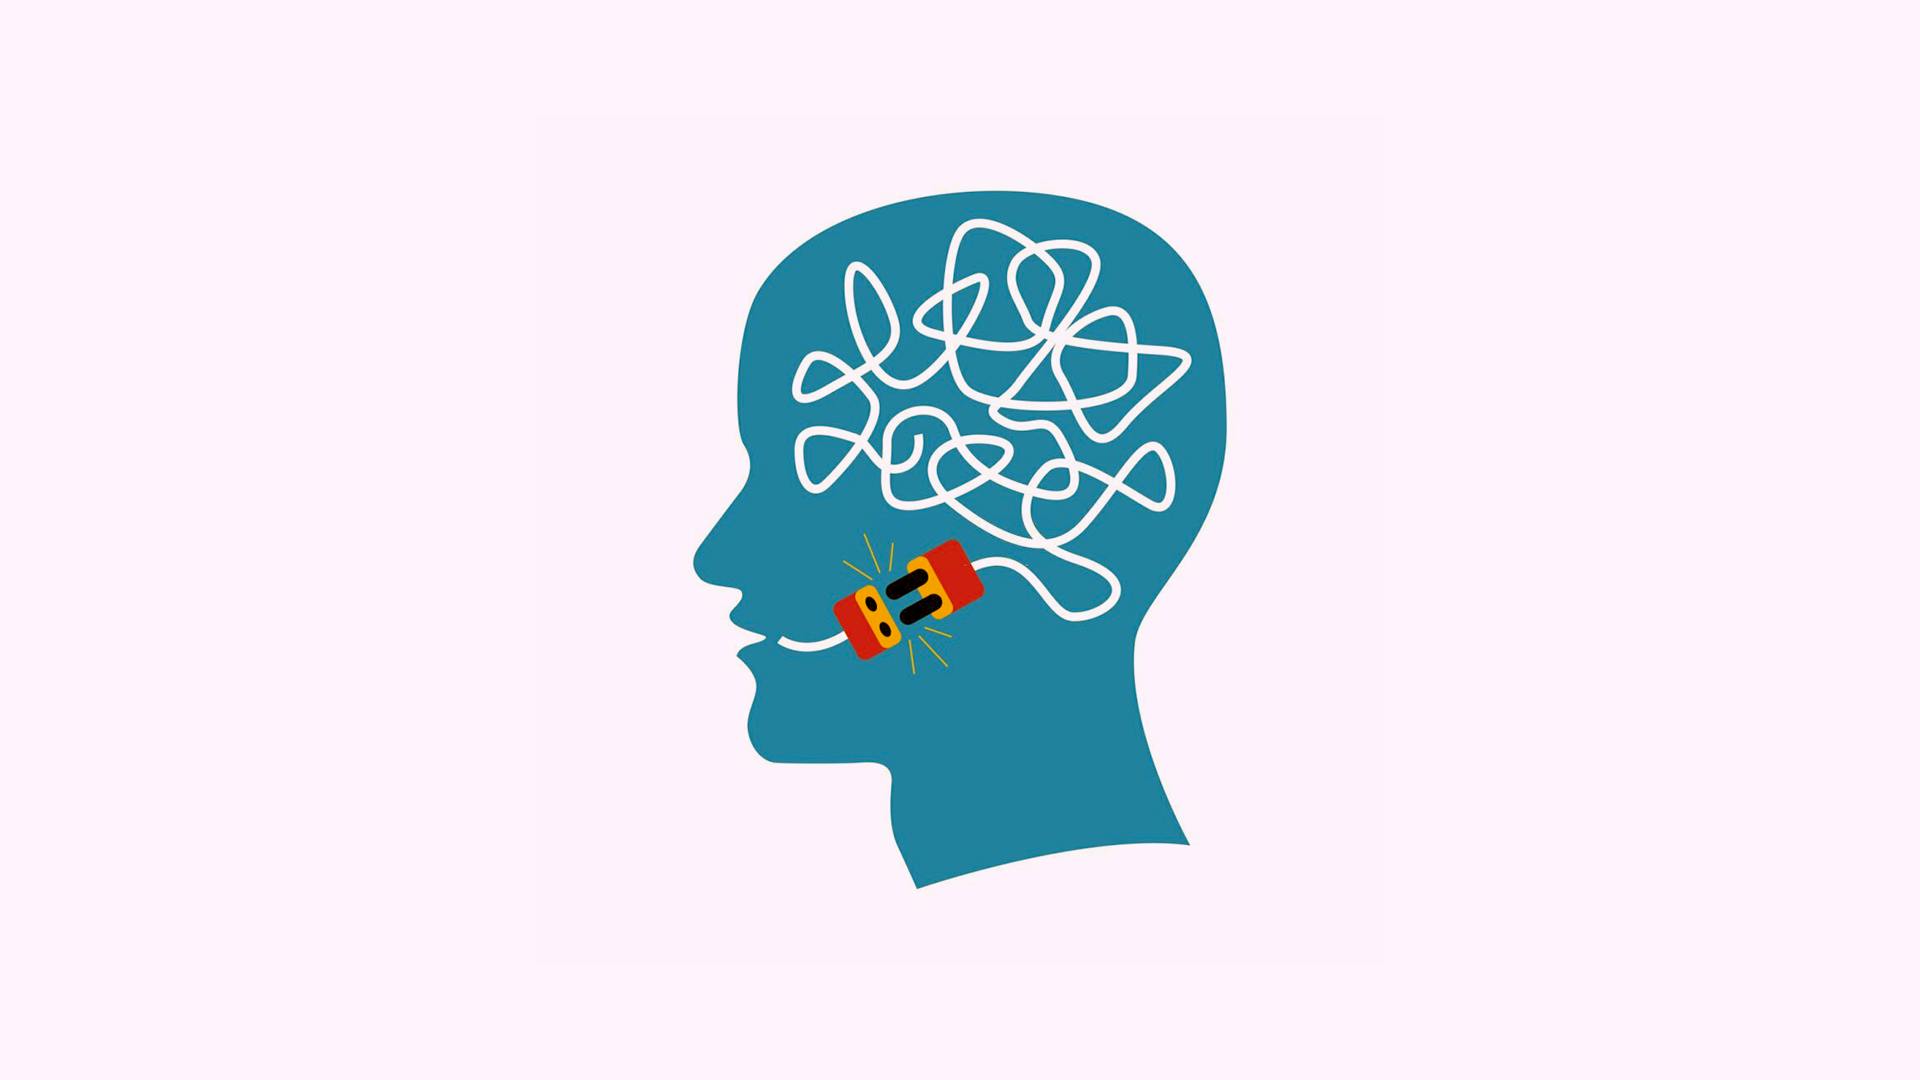 Graphic representation of aphasia: a brain disconnected from a plug that should connect it to the mouth.